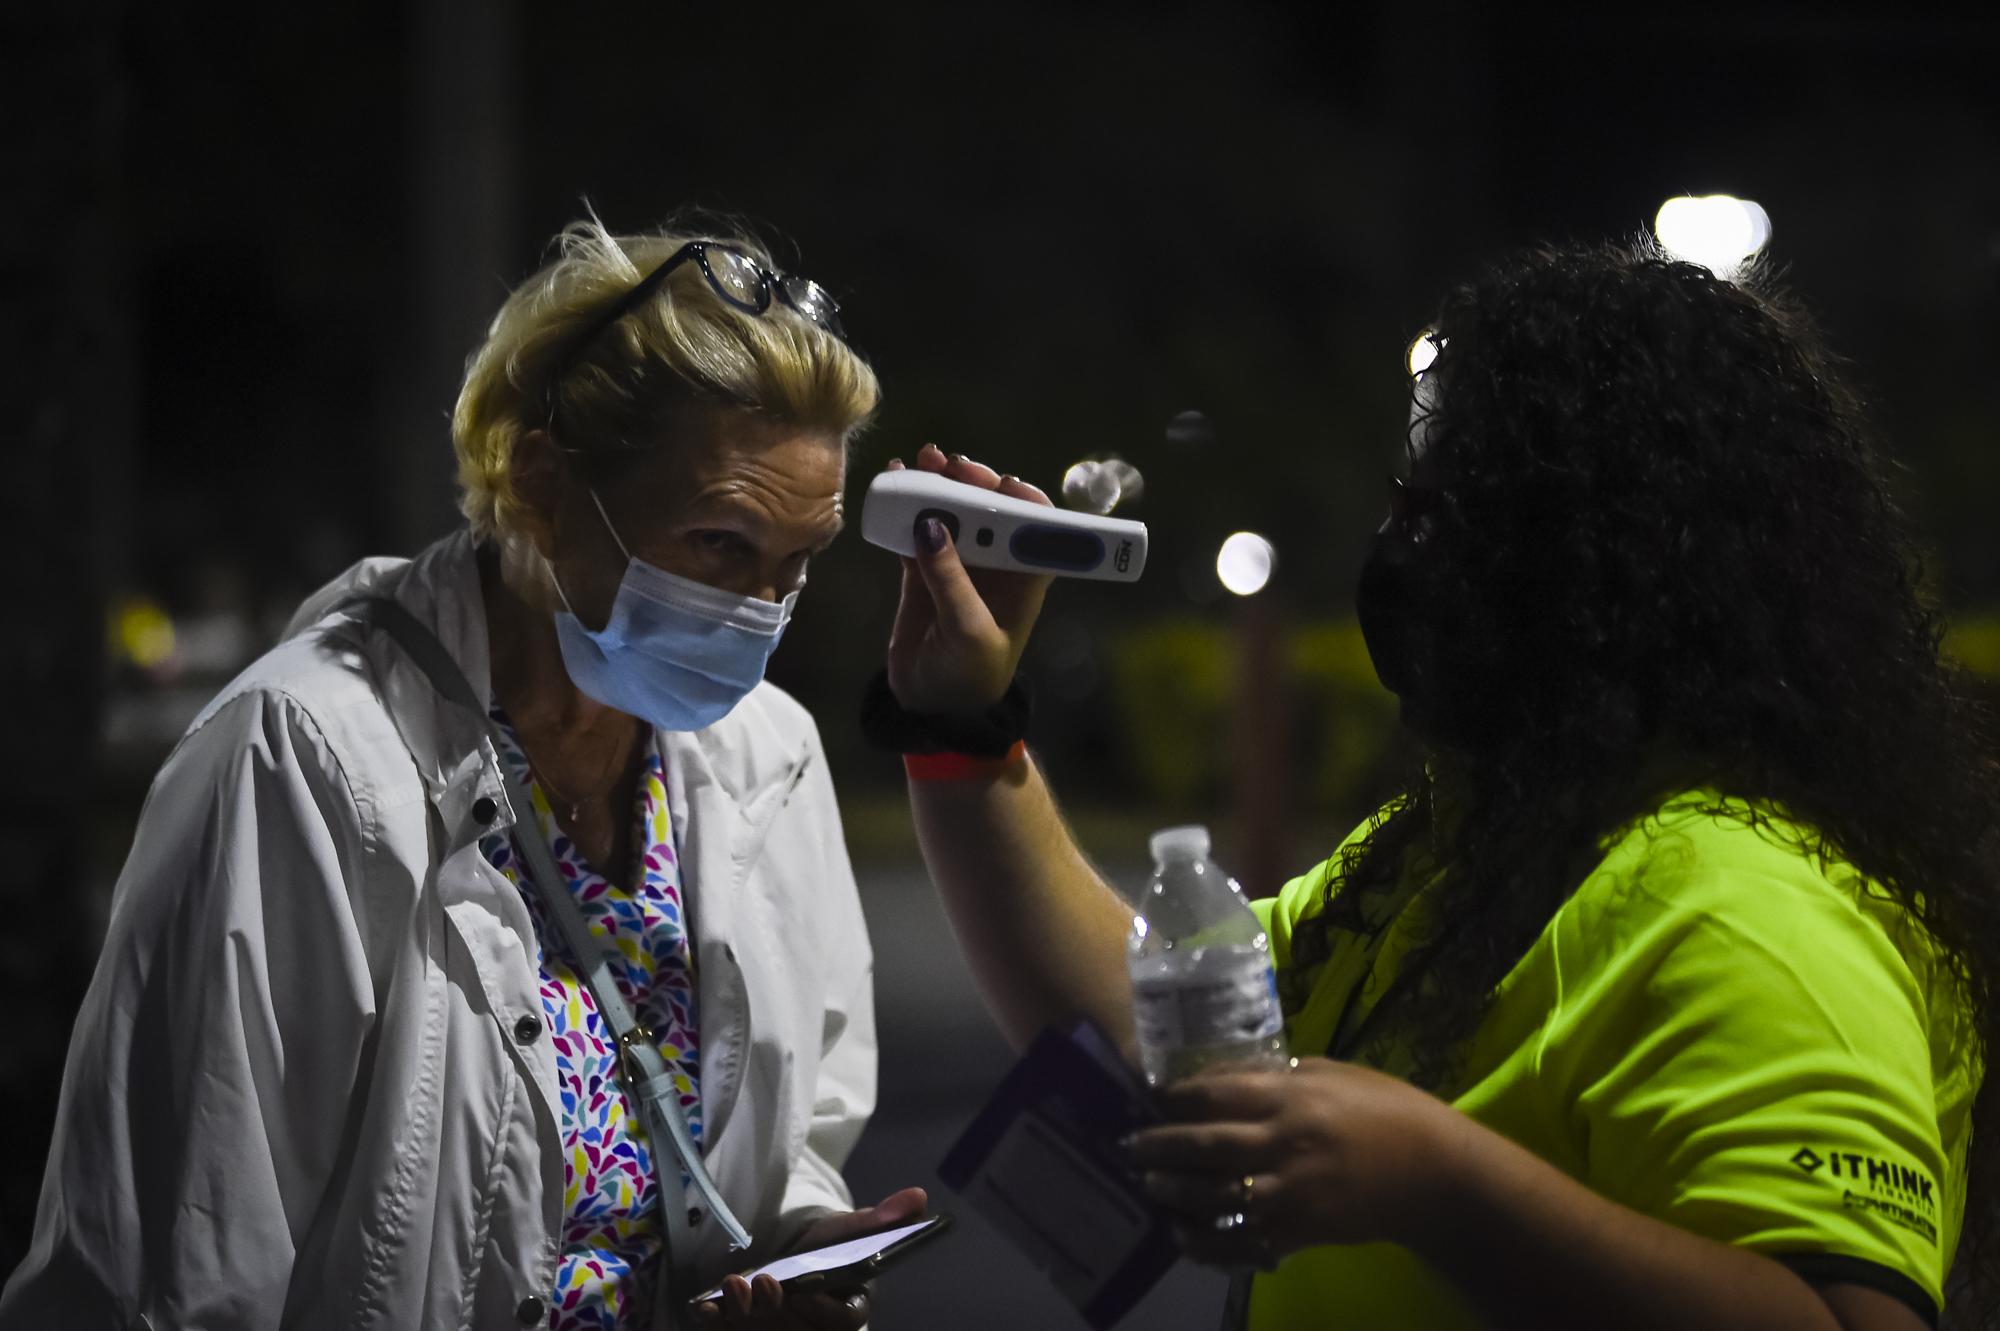 A woman wearing protective face masks has their temperature checked before entering the performance â€œLa BohÃ¨meâ€ during the opening night of the first Palm Beach Operaâ€™s outdoor festival, at the South Florida Fairgroundsâ€™ iTHINK Financial Amphitheatre in West Palm Beach, Florida, U.S., on Friday, Feb. 19, 2021. Photographer: Eva Marie Uzcategui/Bloomberg